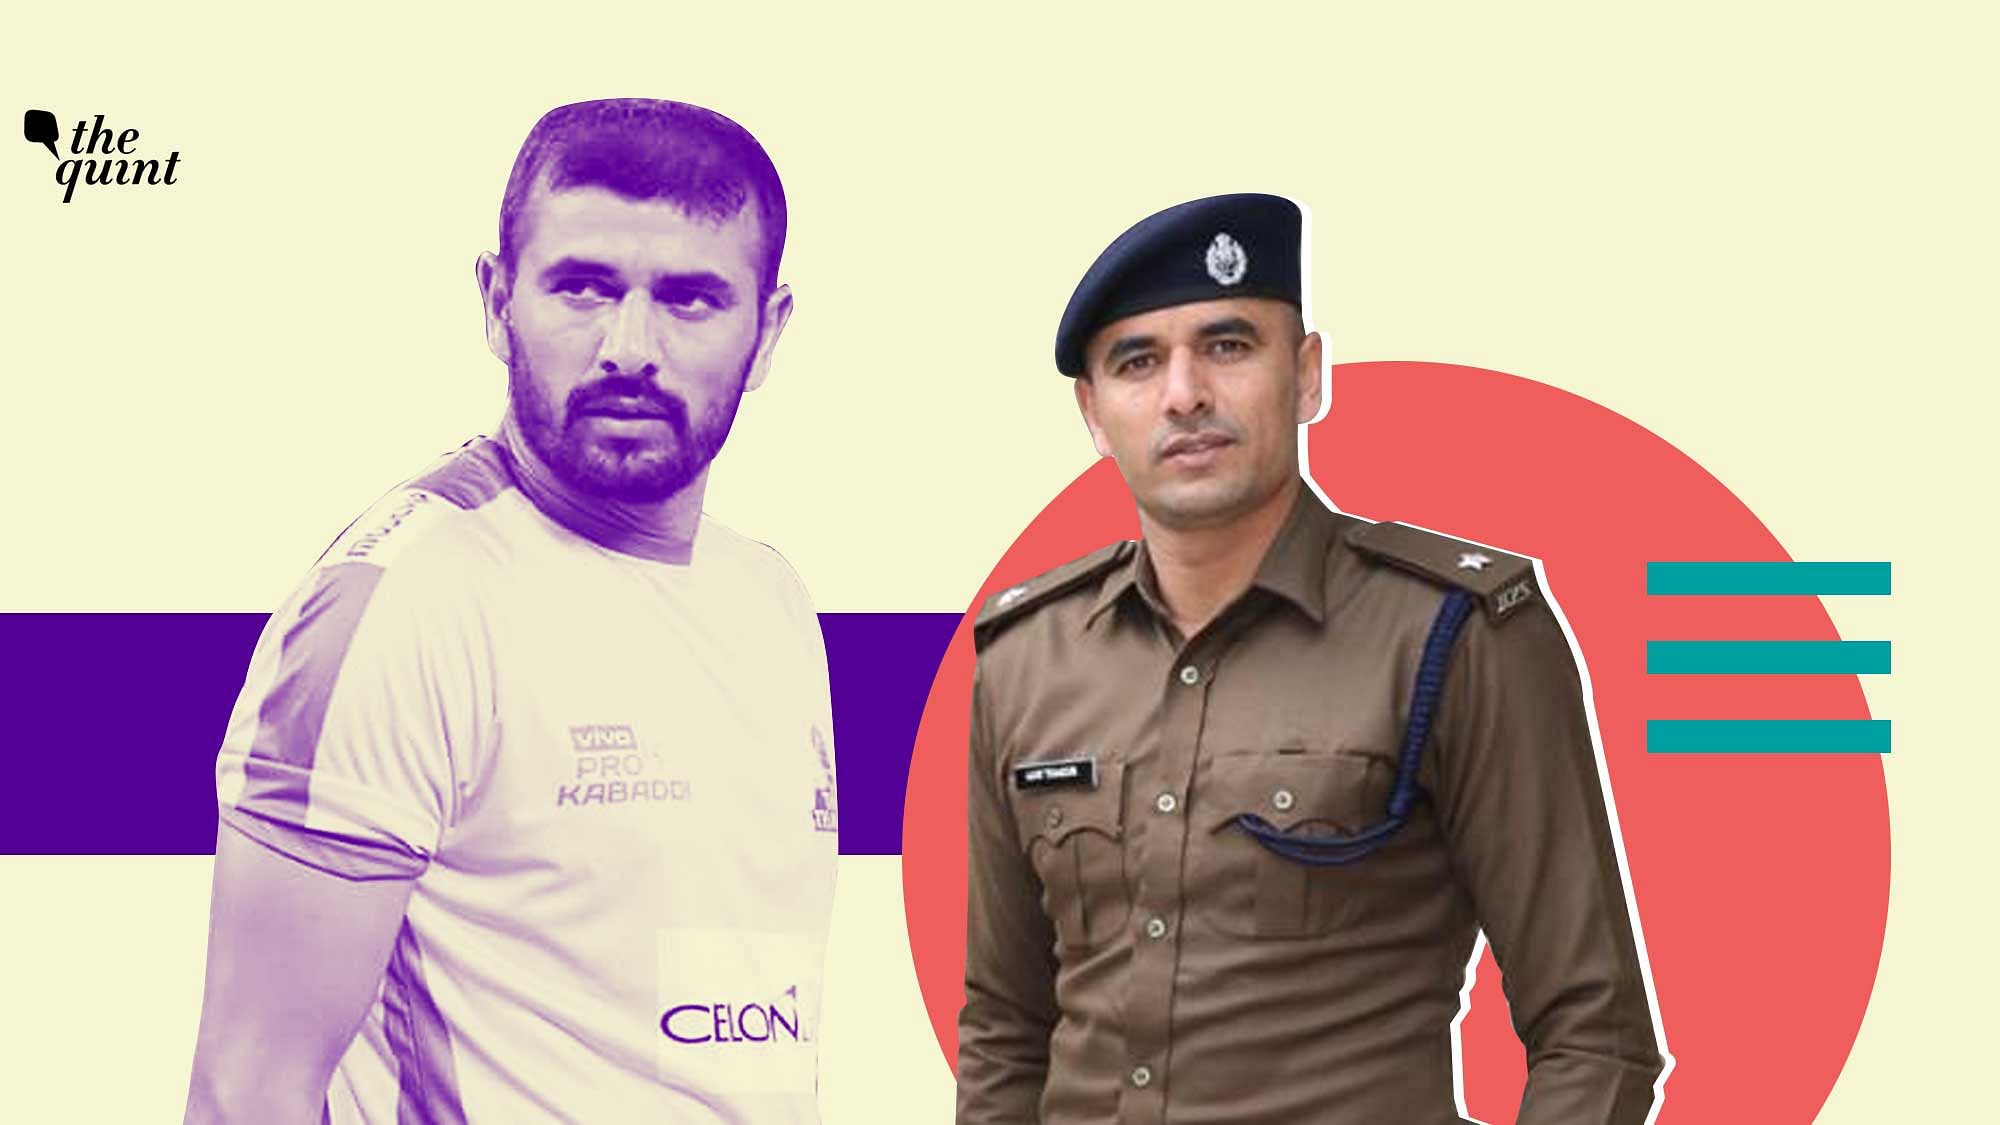 Indian kabaddi star Ajay Thakur is currently serving on duty as a Deputy Superintendent of Police in Himachal Pradesh.